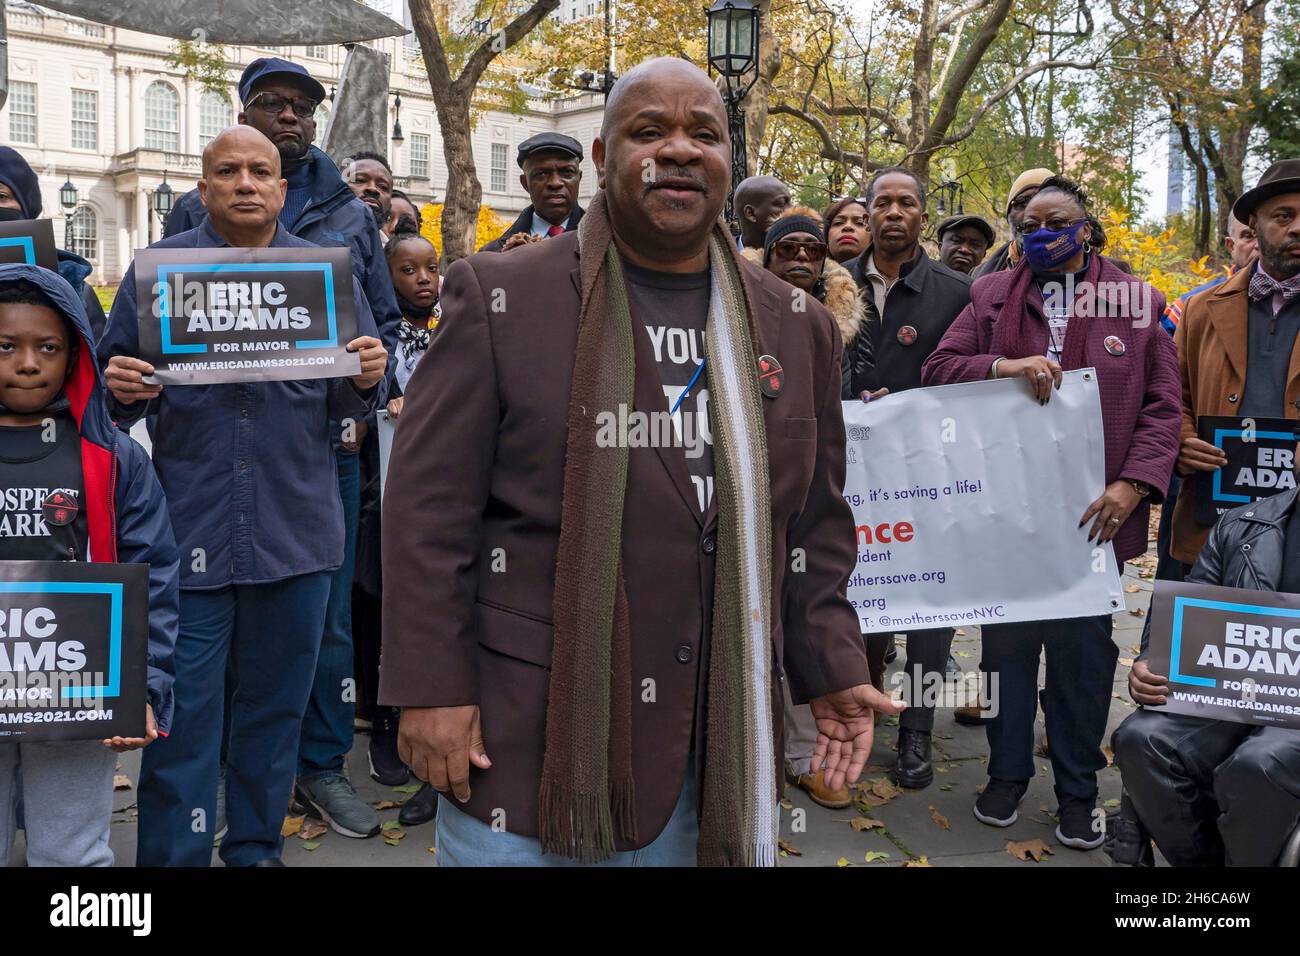 NEW YORK, NY - NOVEMBER 14: Geoffrey Davis, Executive Director of the James E. Davis Stop Violence Foundation speaks during a rally at City Hall Park on November 14, 2021 in New York City.   Activists against gun violence staged a rally in support of mayor-elect Eric Adams, who was threatened by New York BLM co-founder Hawk Newsome who vowed there'll be 'riots,' 'fire' and 'bloodshed' if mayor-elect Eric Adams follows through with his promise to bring back plainclothes anti-crime cops to battle New York's surge in violent crimes.   A coalition of Black and Brown community activists show solida Stock Photo